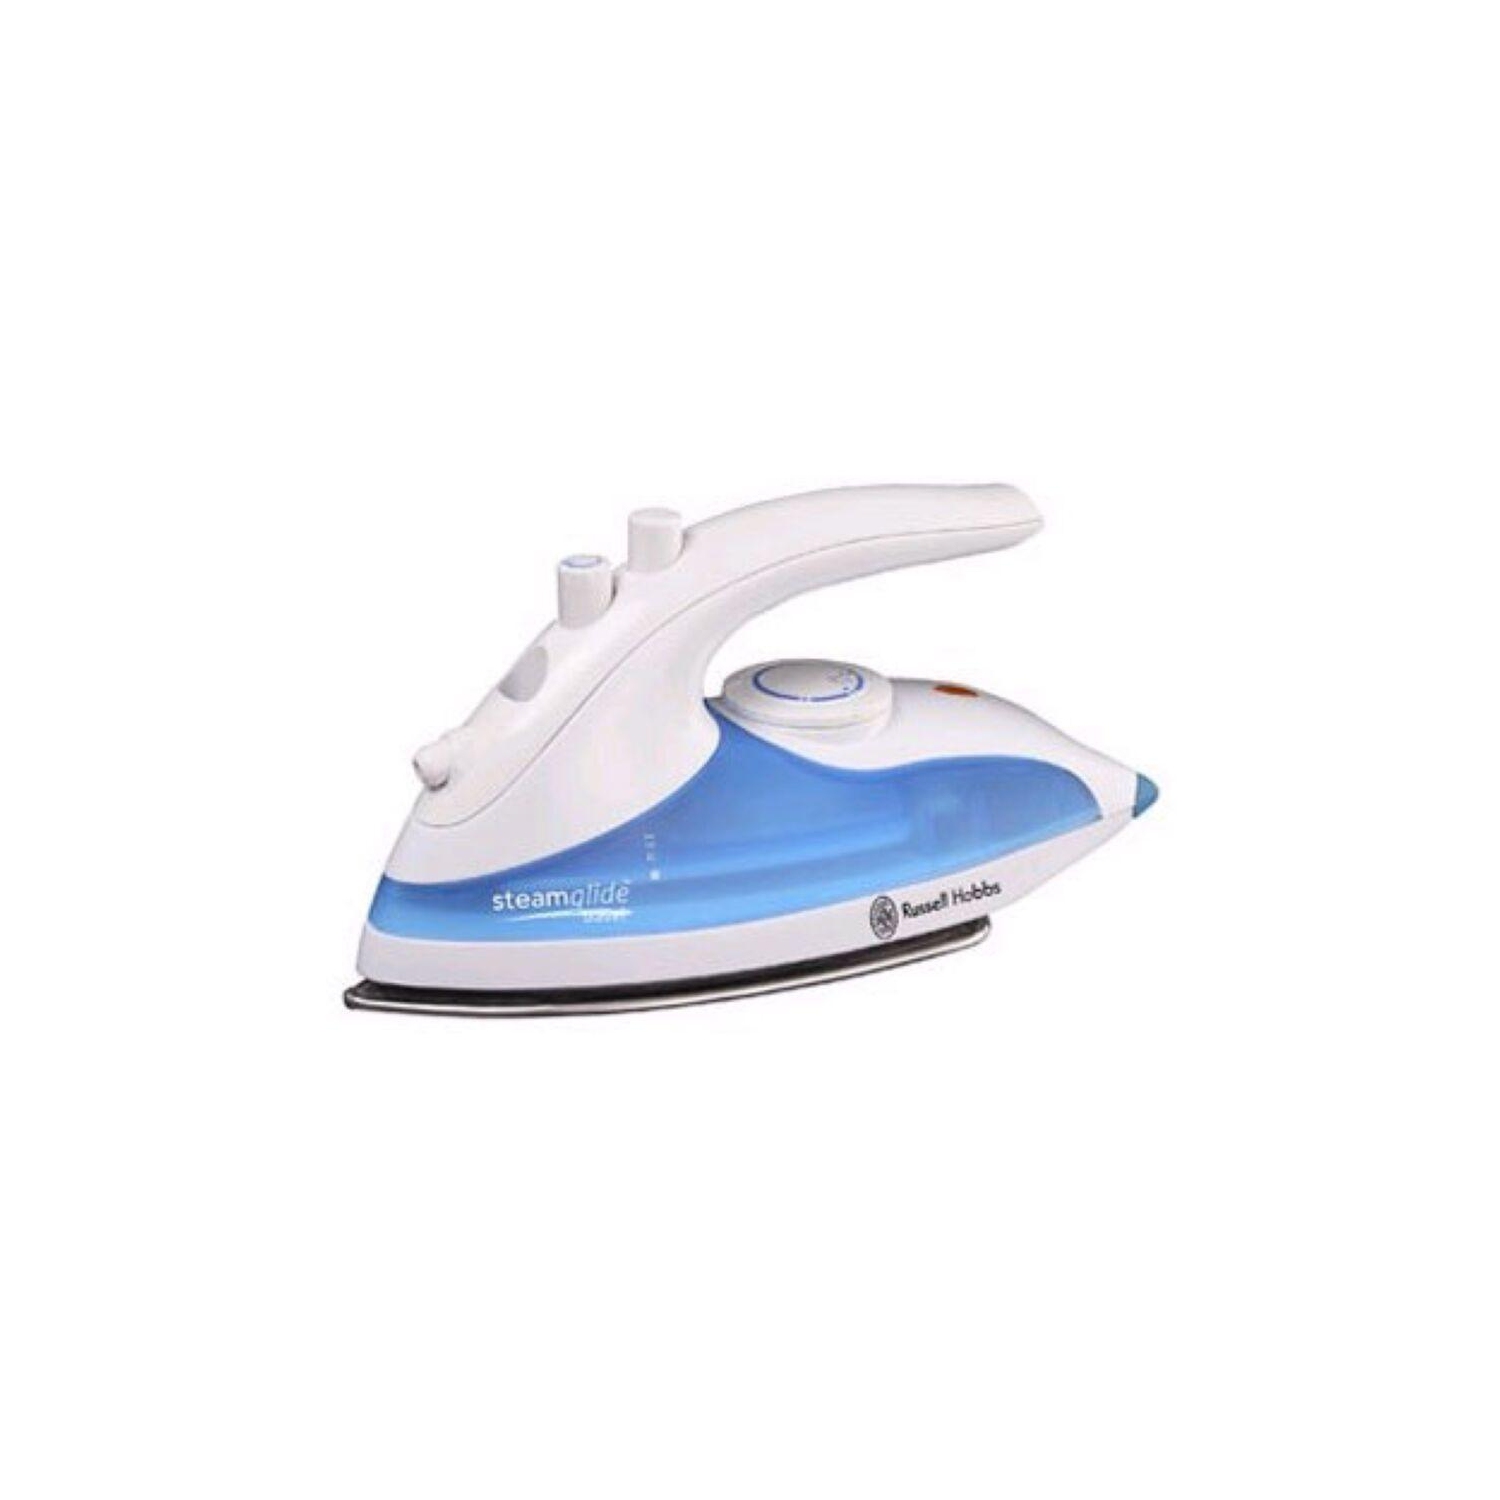 Travel Iron by  Russell hobbs - 0